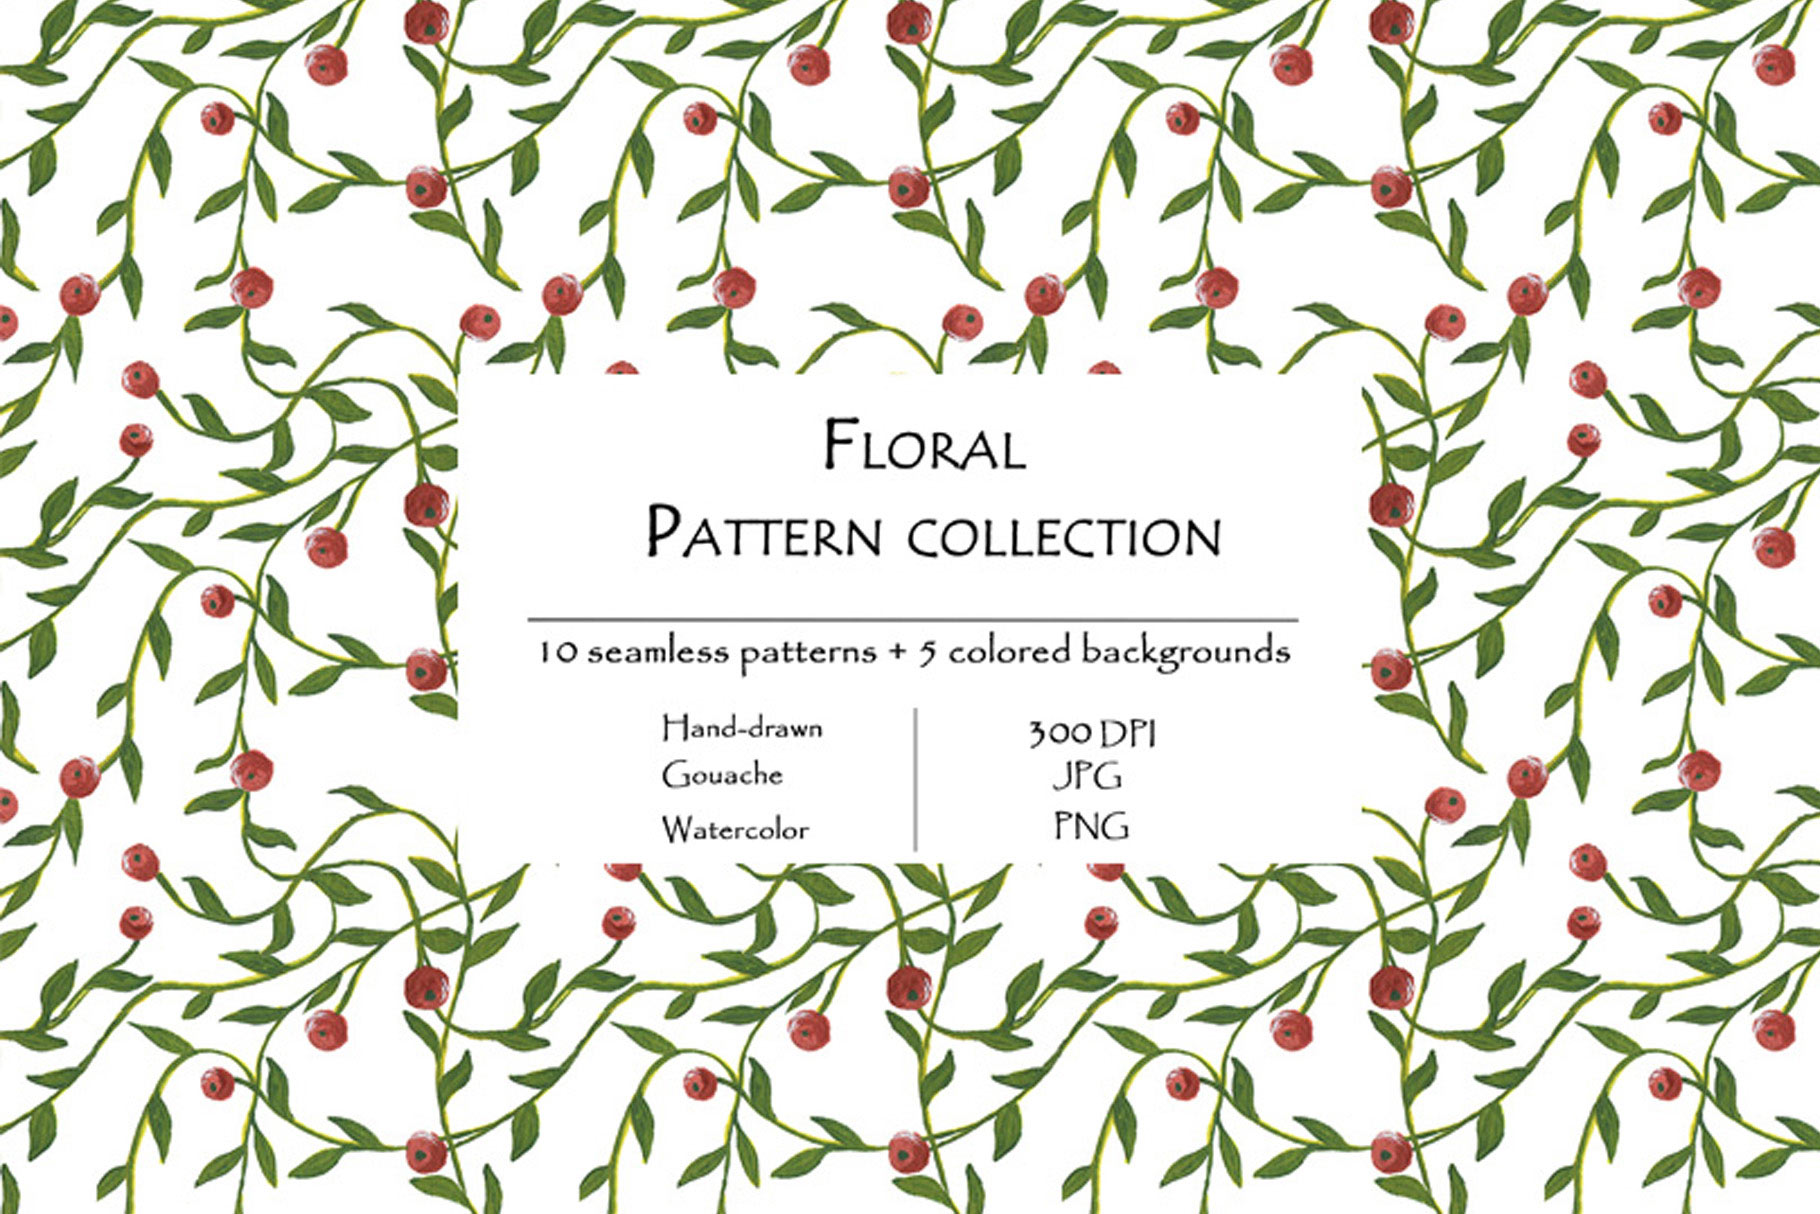 Floral Pattern Collection Of 10 Seamless Patterns And 5 Colored Backgrounds.